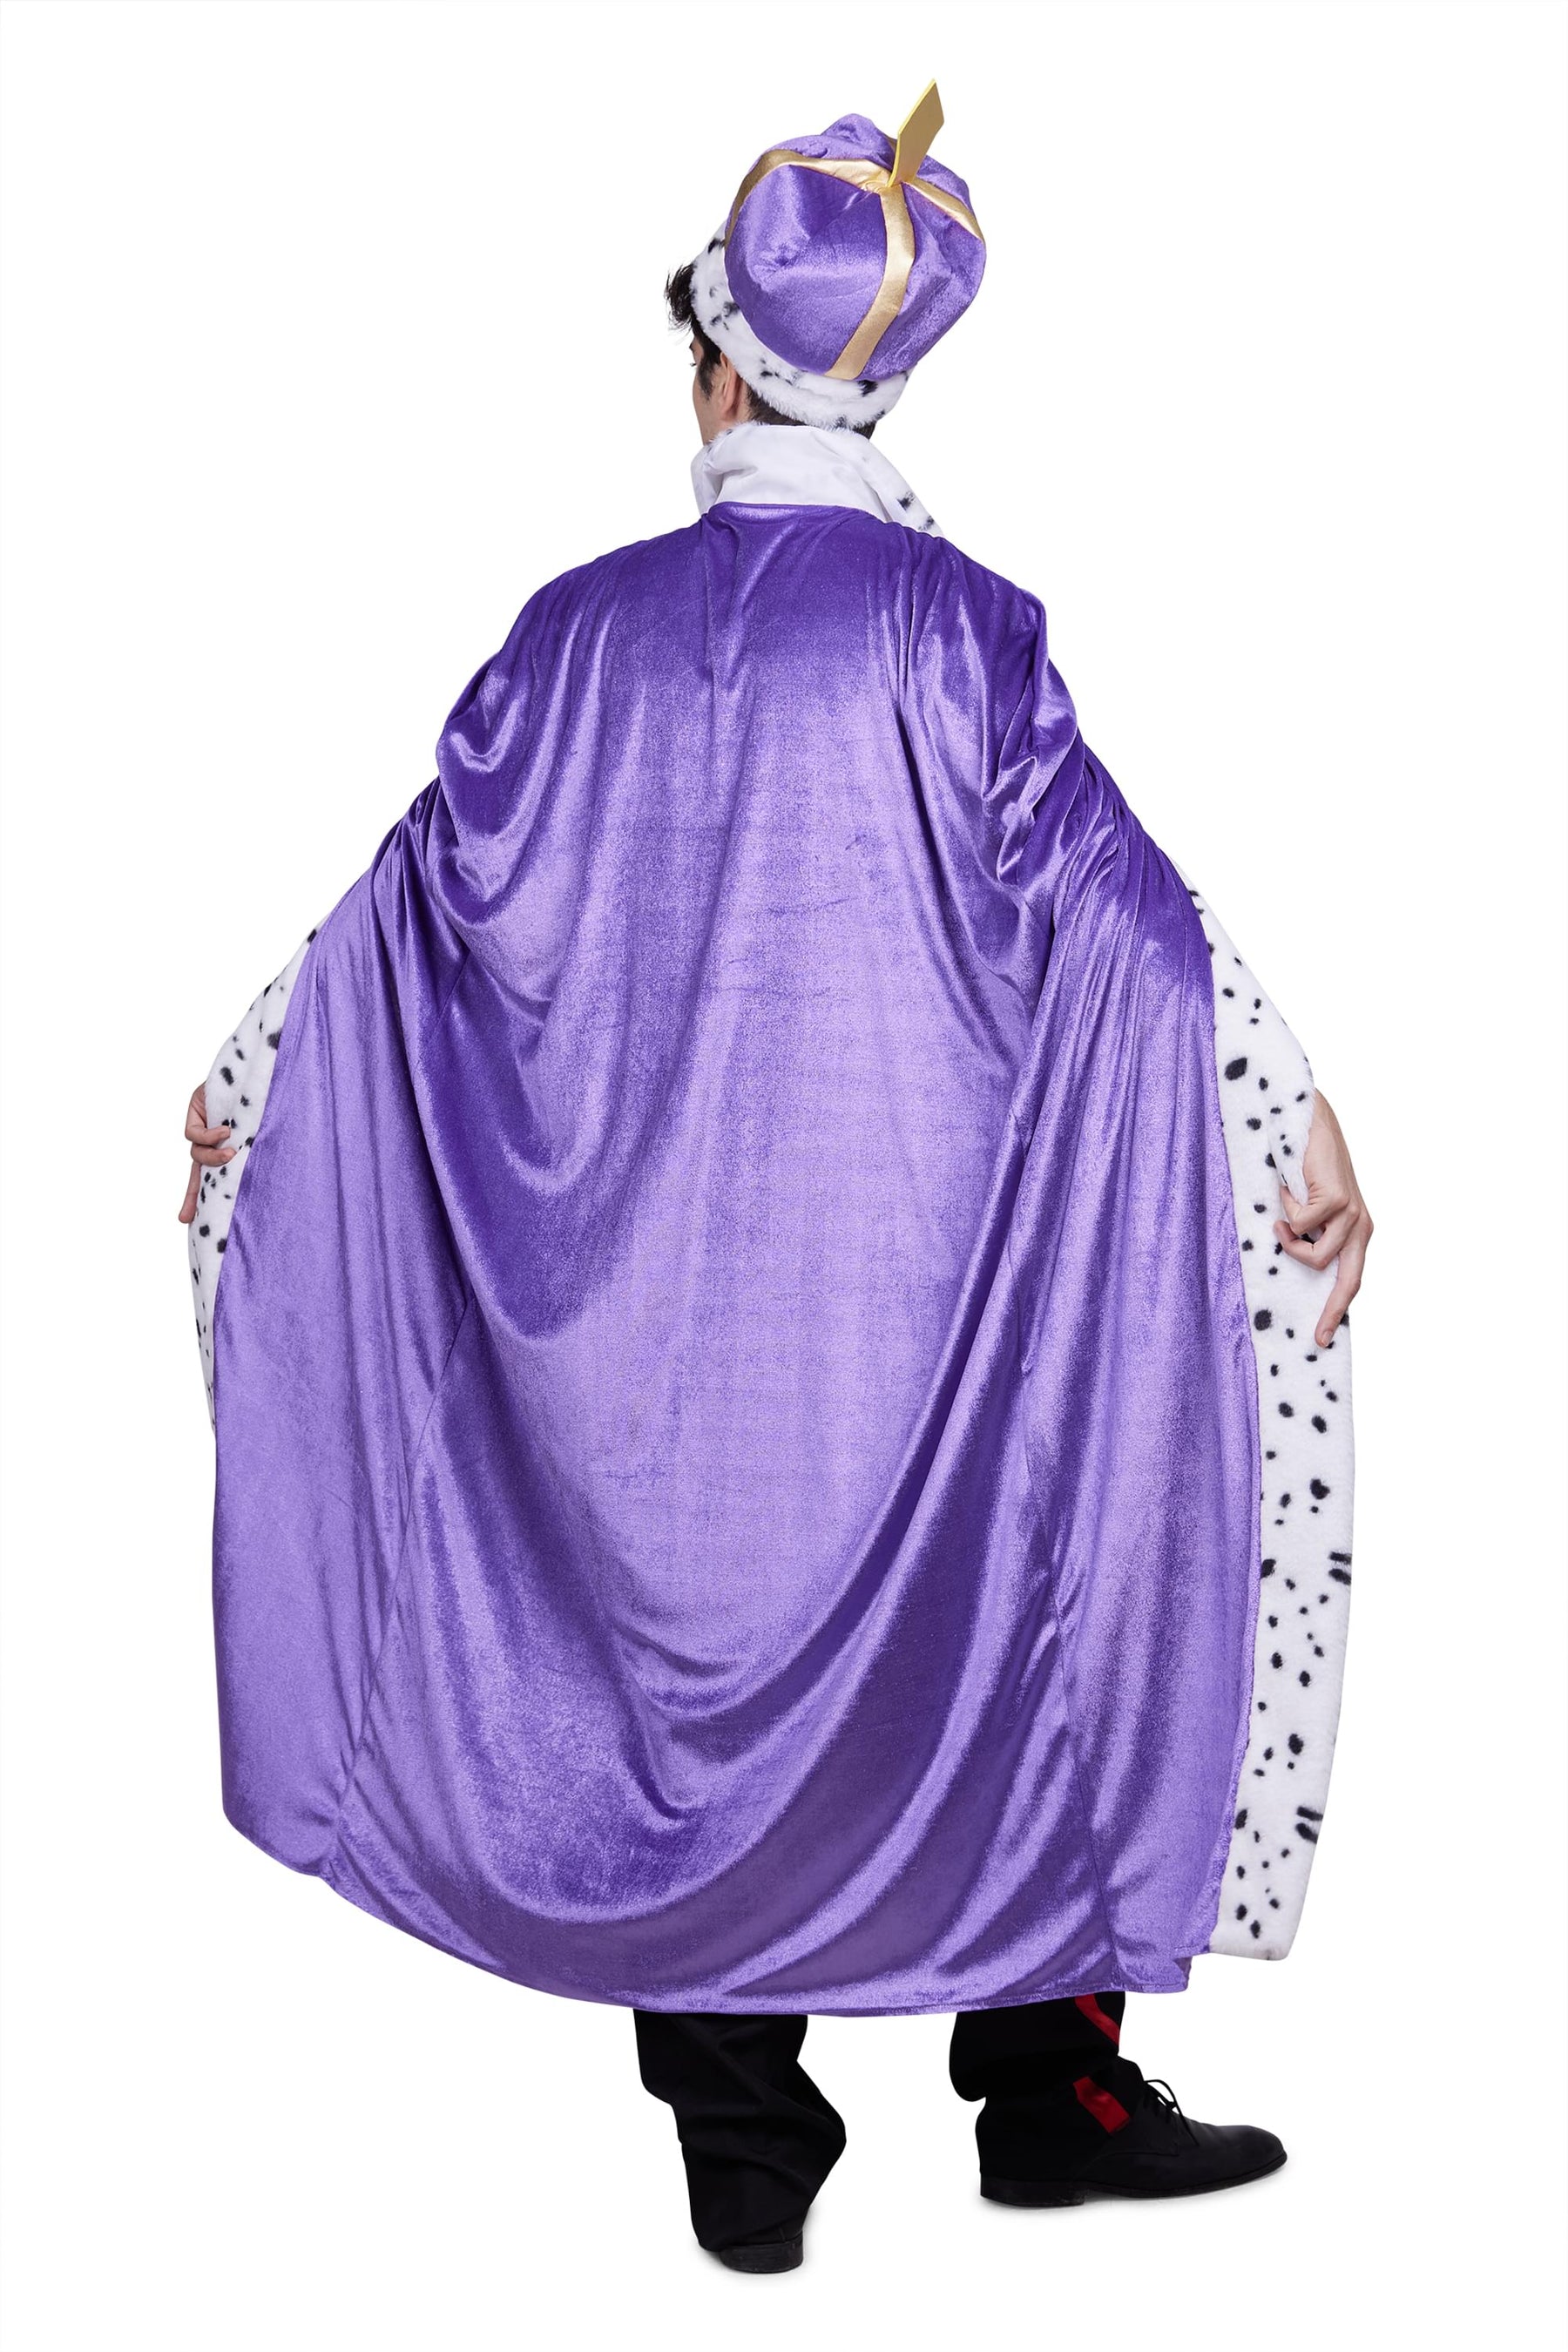 Royal King Cape and Crown Adult Costume Set | One Size Fits Most